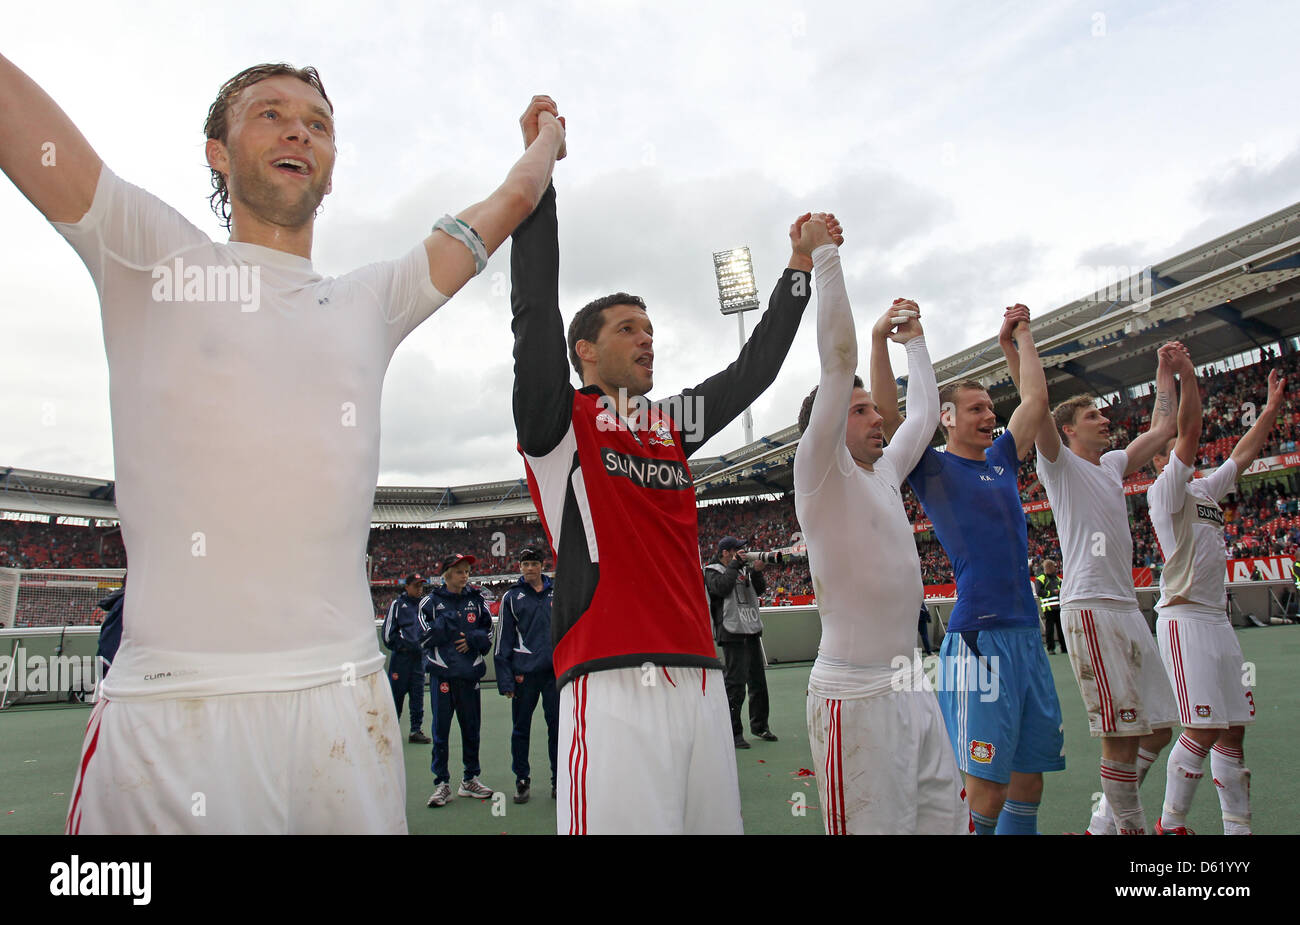 Leverkusen's Simon Rolfes (L-R), Michael Ballack, Gonzalo Castro, Bernd Leno and Stefan Kiessling celebrate with the fans after the Bundesliga soccer match between FC Nuremberg and Bayer 04 Leverkusen at easyCredit Stadion in Nuremberg, Germany, 05 May 2012. The match ended 1-4. Photo: Daniel Karmann Stock Photo